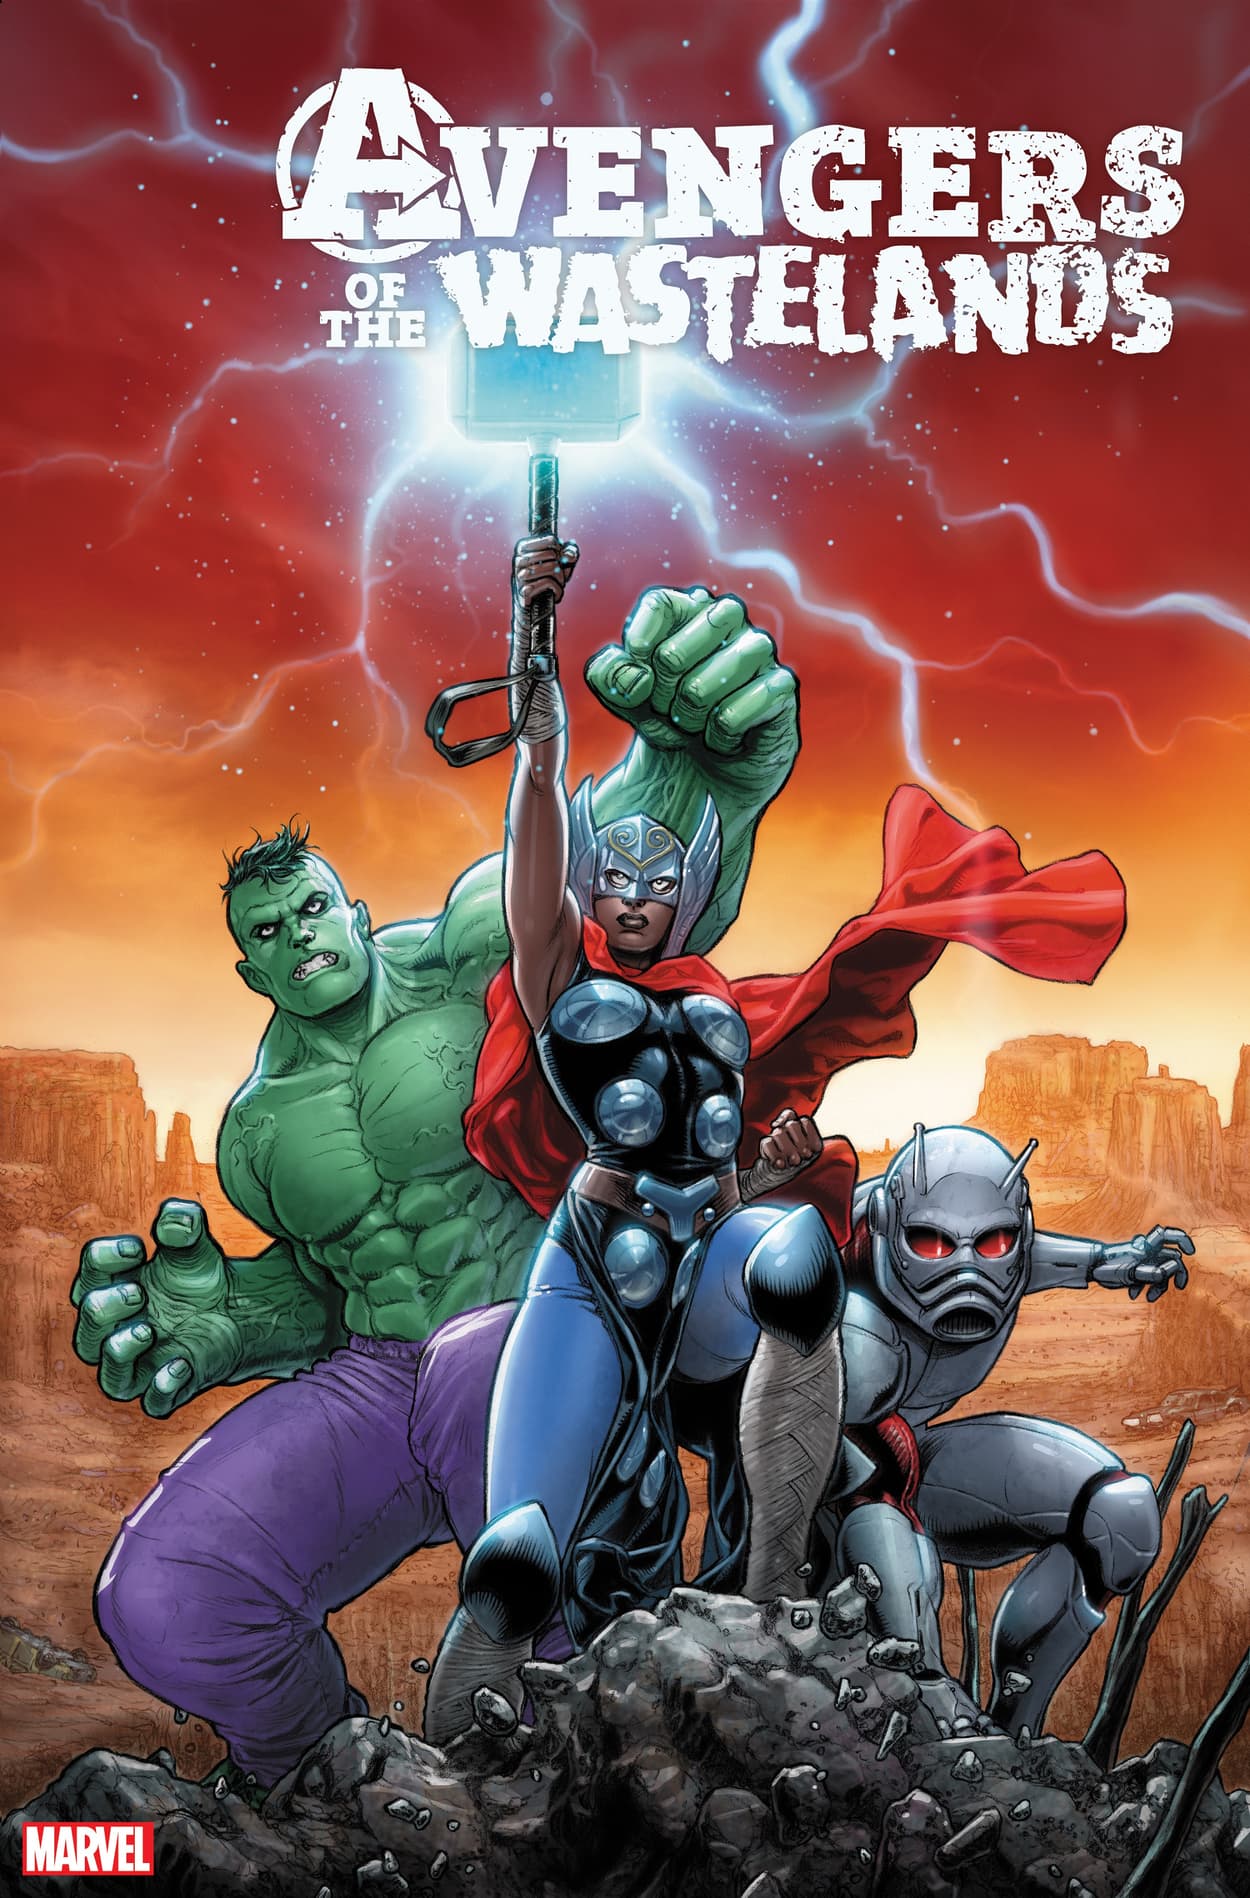 AVENGERS OF THE WASTELANDS #1 cover by Juan José Ryp